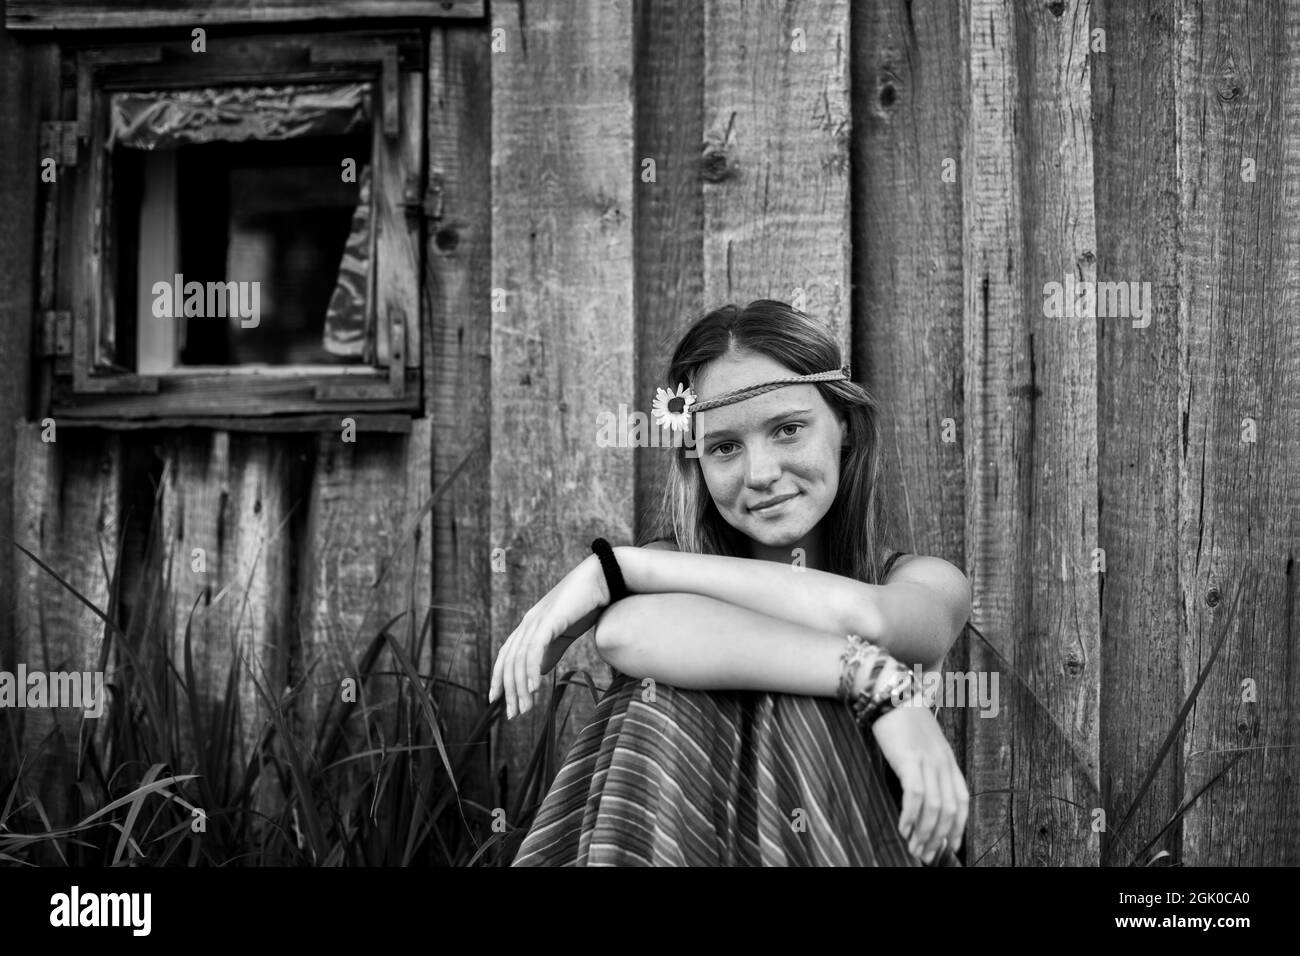 An girl with hippie jewelry in rural surroundings. Black and white photo. Stock Photo